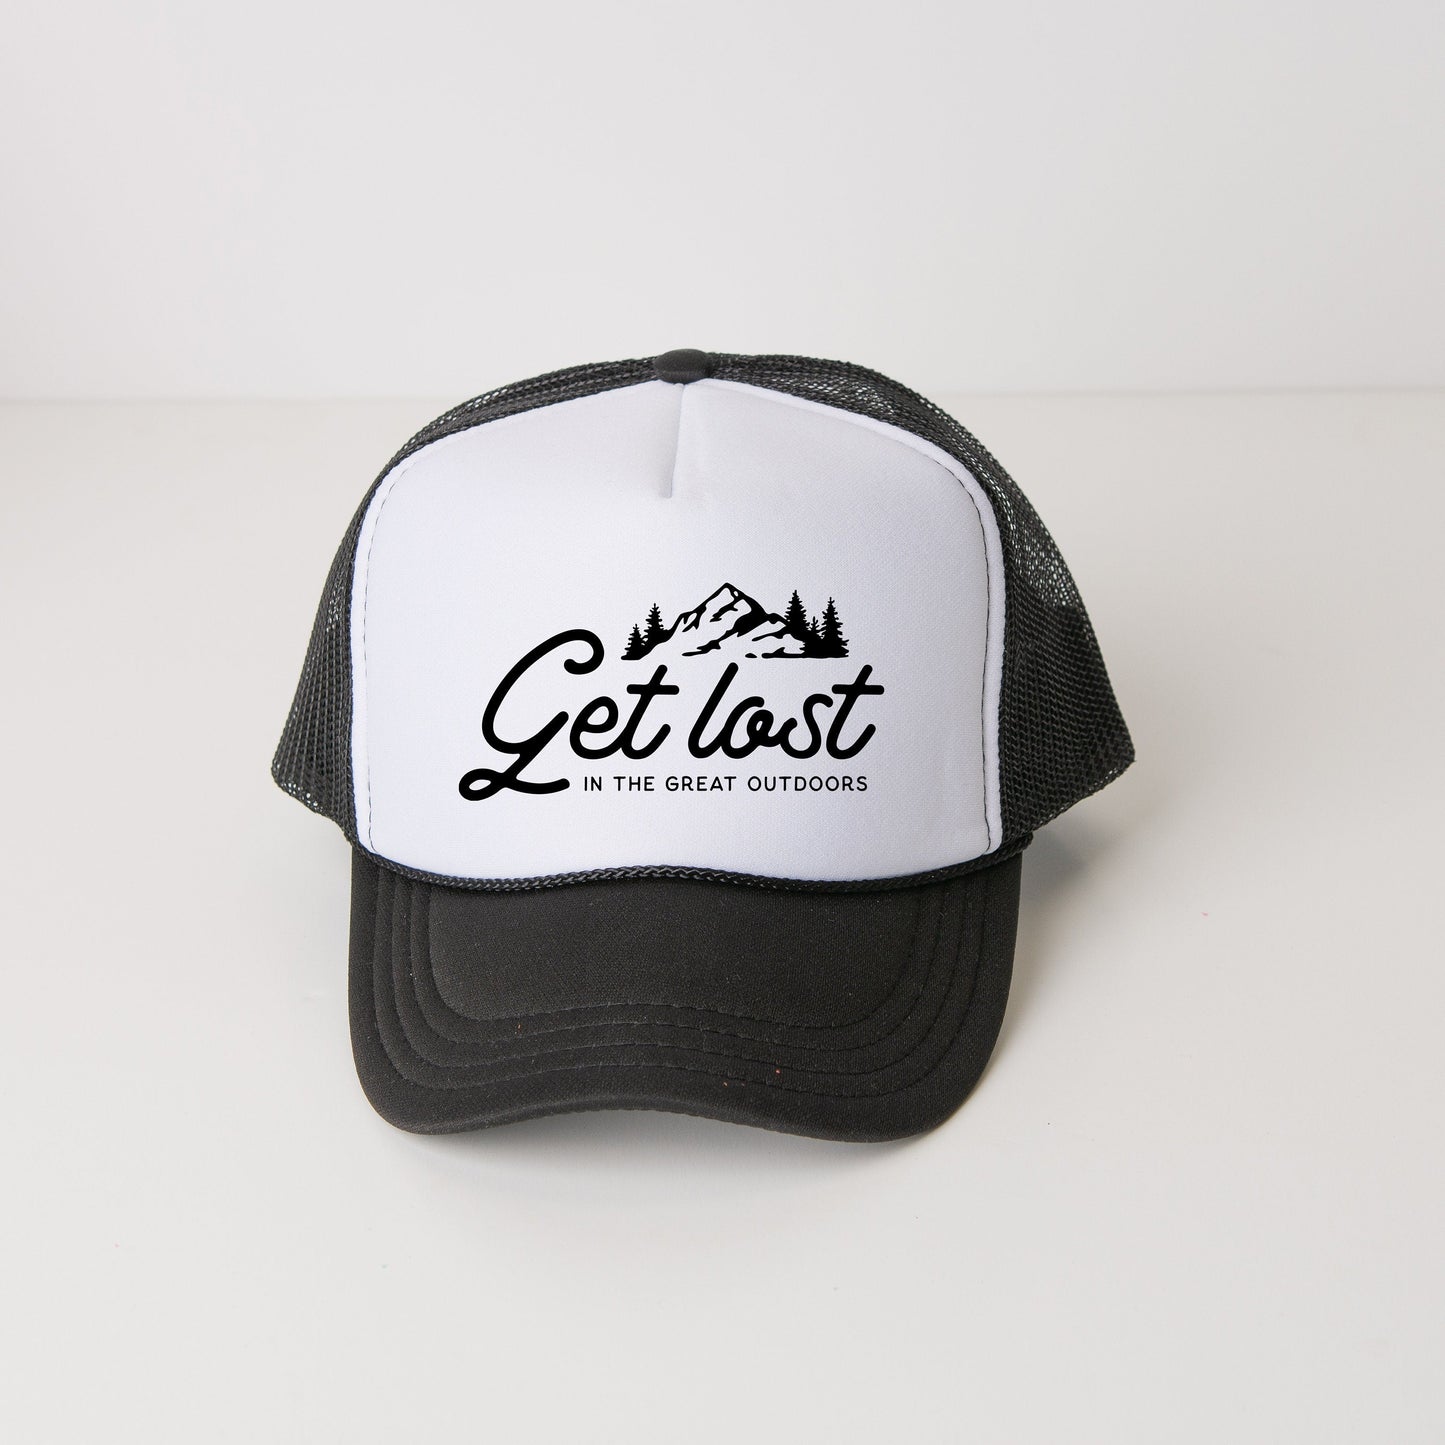 a black and white hat with the words get lost on it